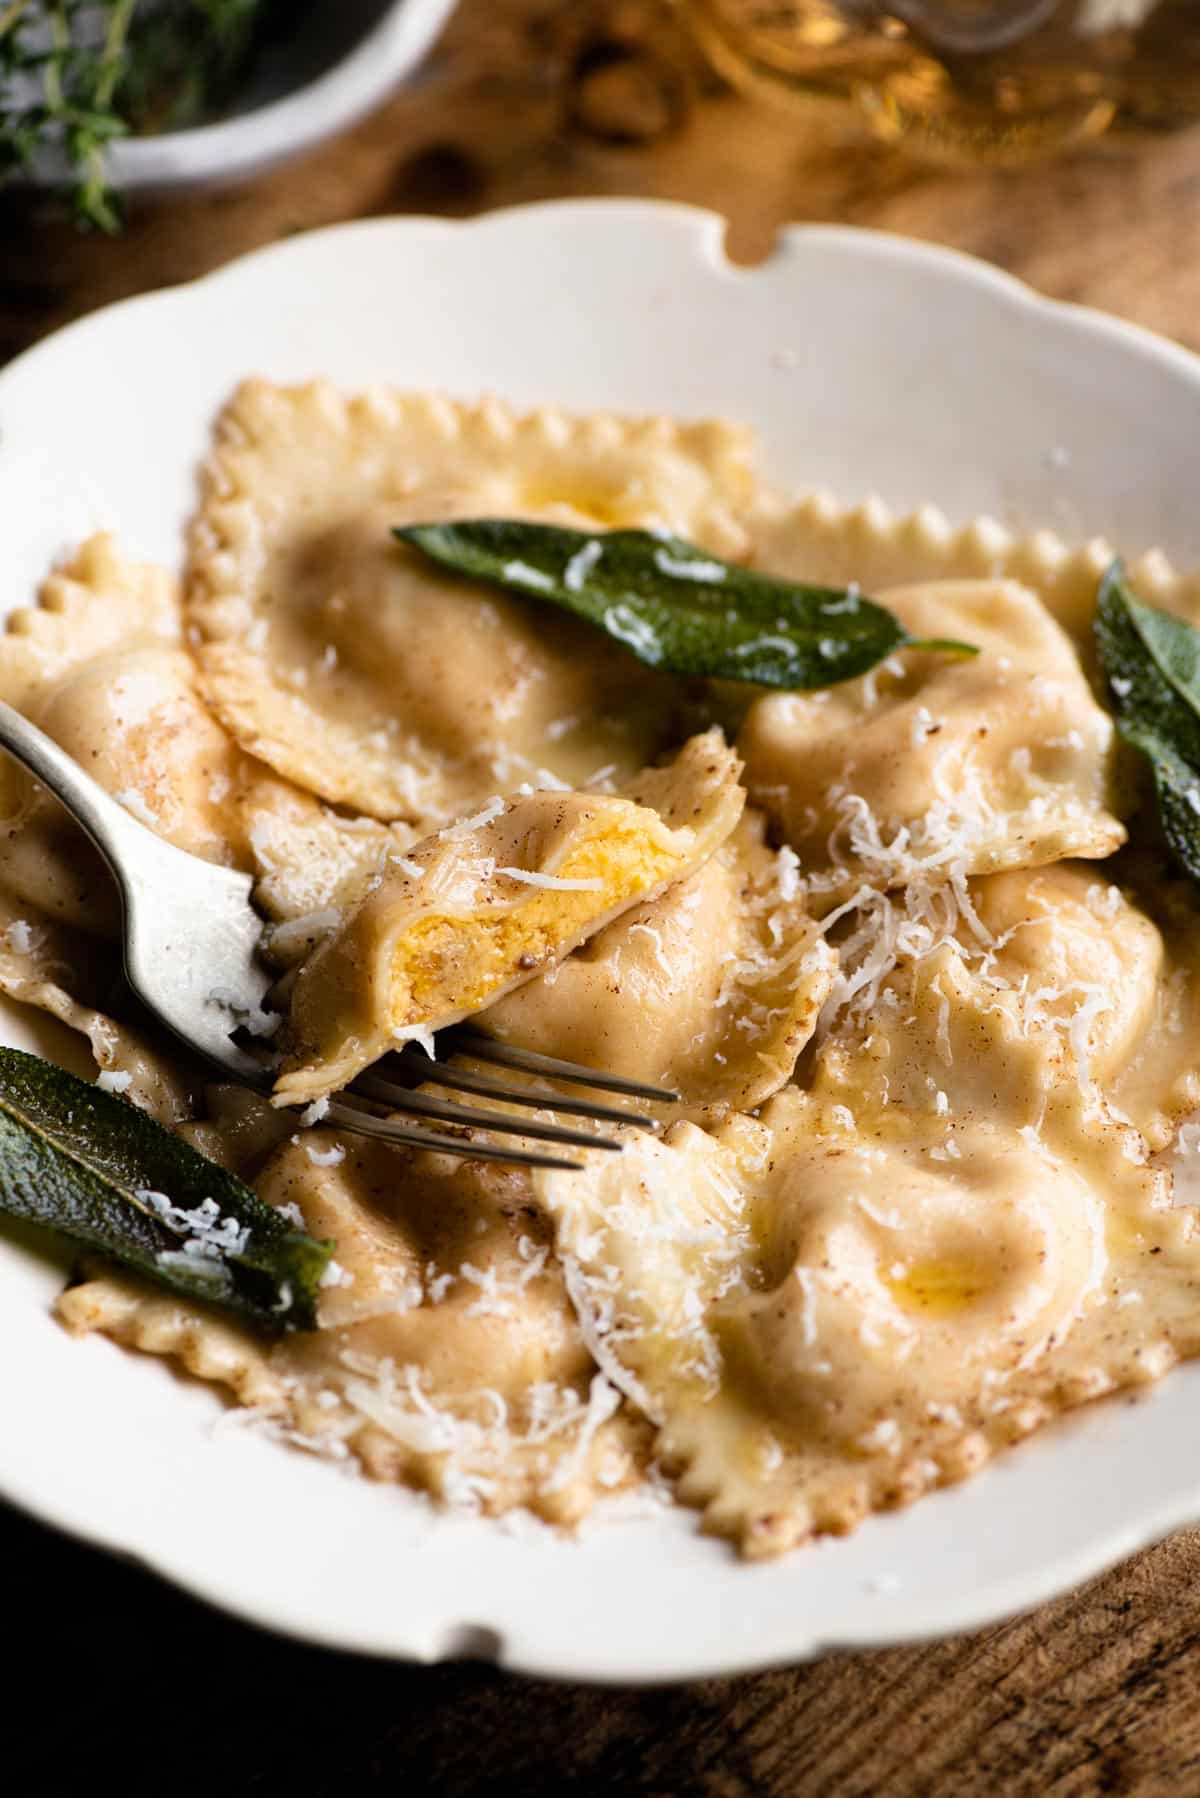 A close up of butternut squash ravioli and sage butter in a bowl with one ravioli cut in half showing the orange filling.